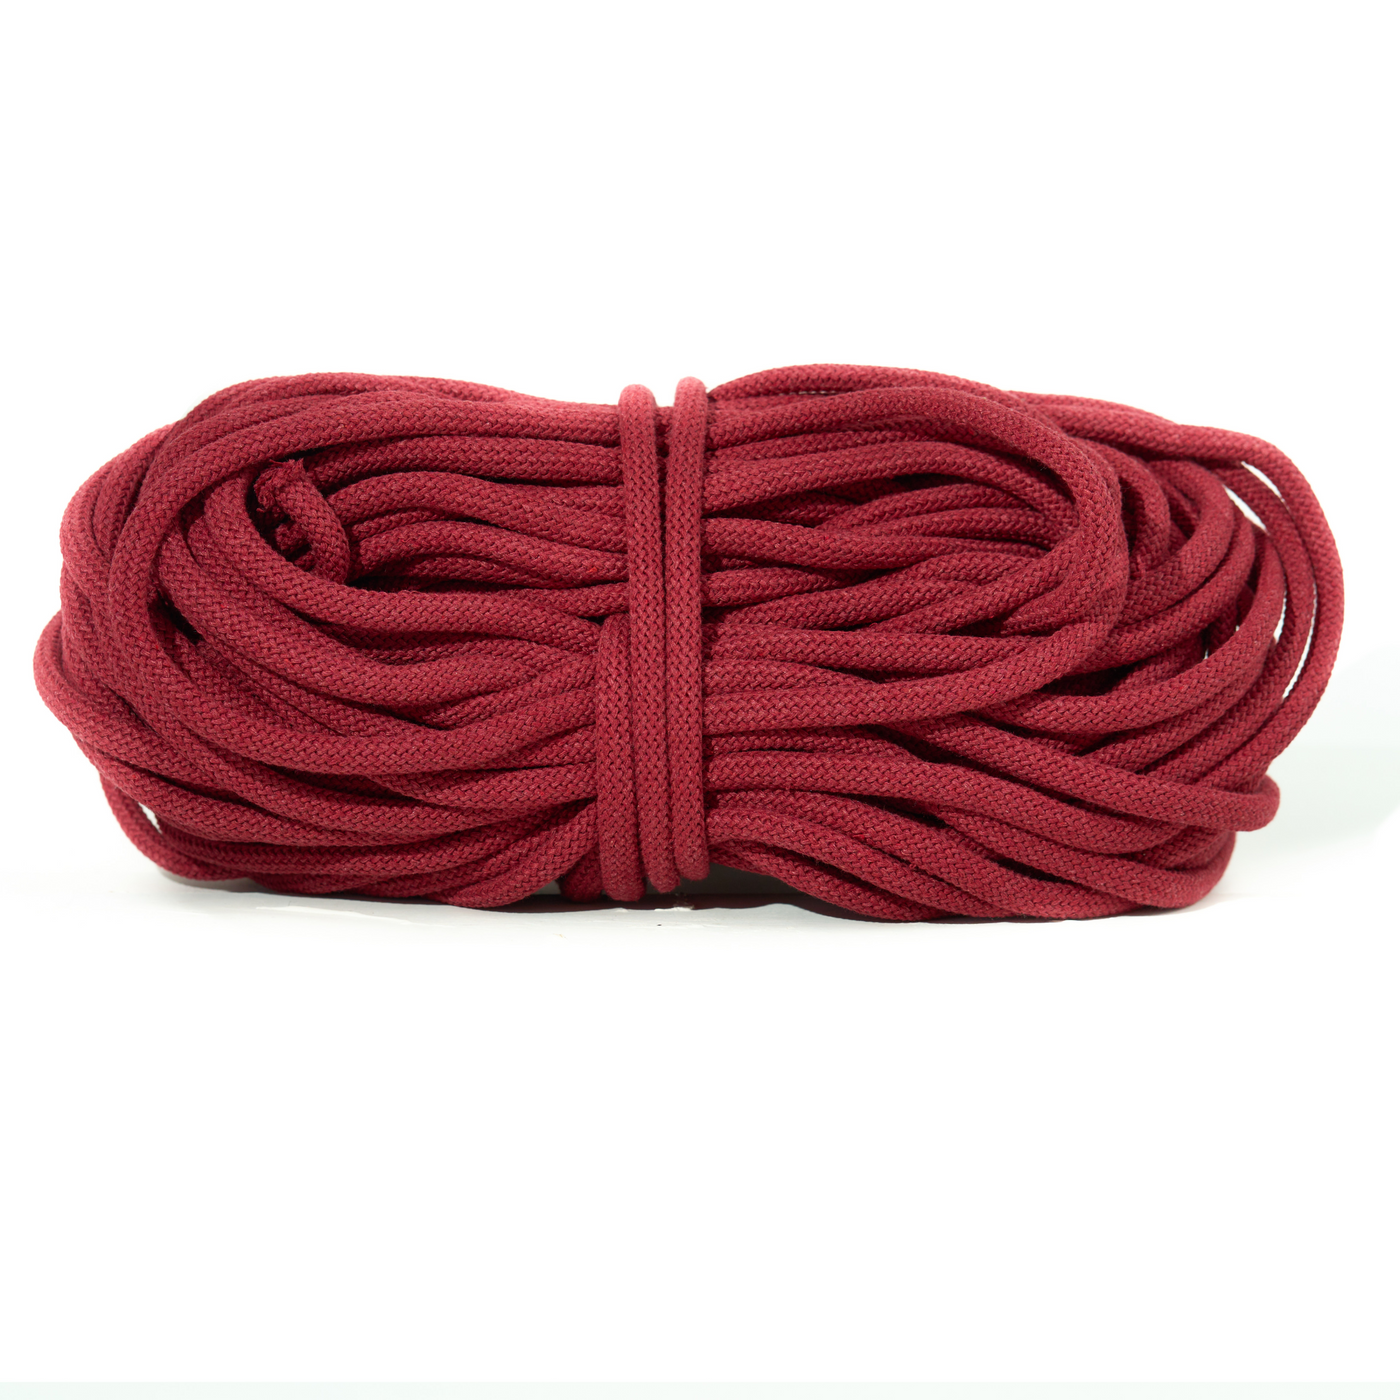 Braided Recycled Cotton Cord 9mm - Berry Red